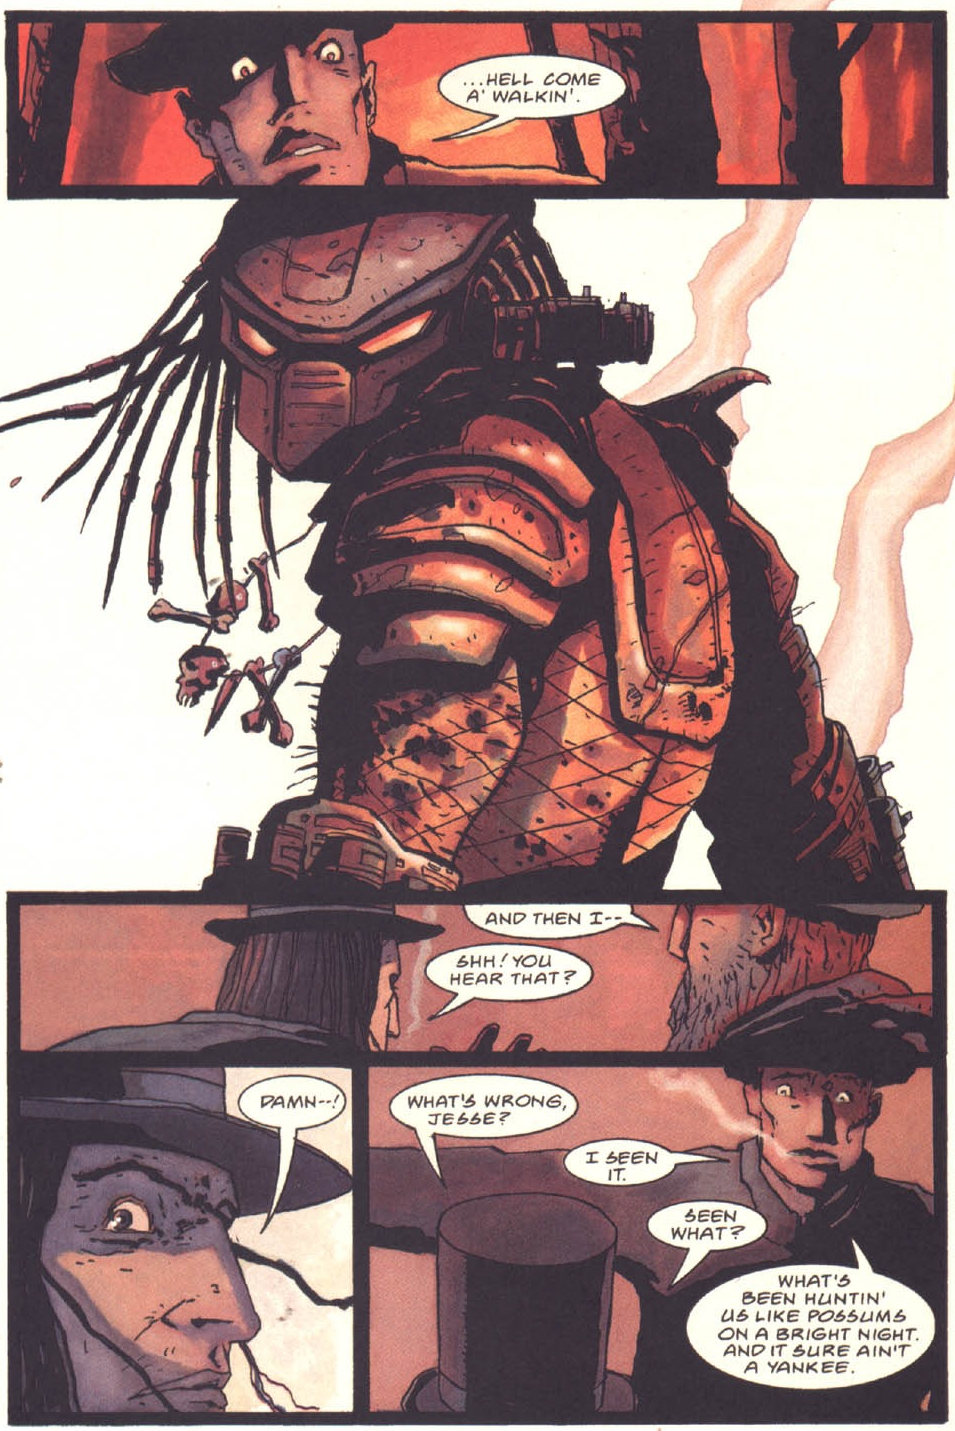 Spartacus discovers just what has been hunting his group in Predator: Hell Come A-Walkin' Vol.1 #1 (1998), Dark Horse Comics. Words by Nancy A. Collins, art by Dean Ormston.